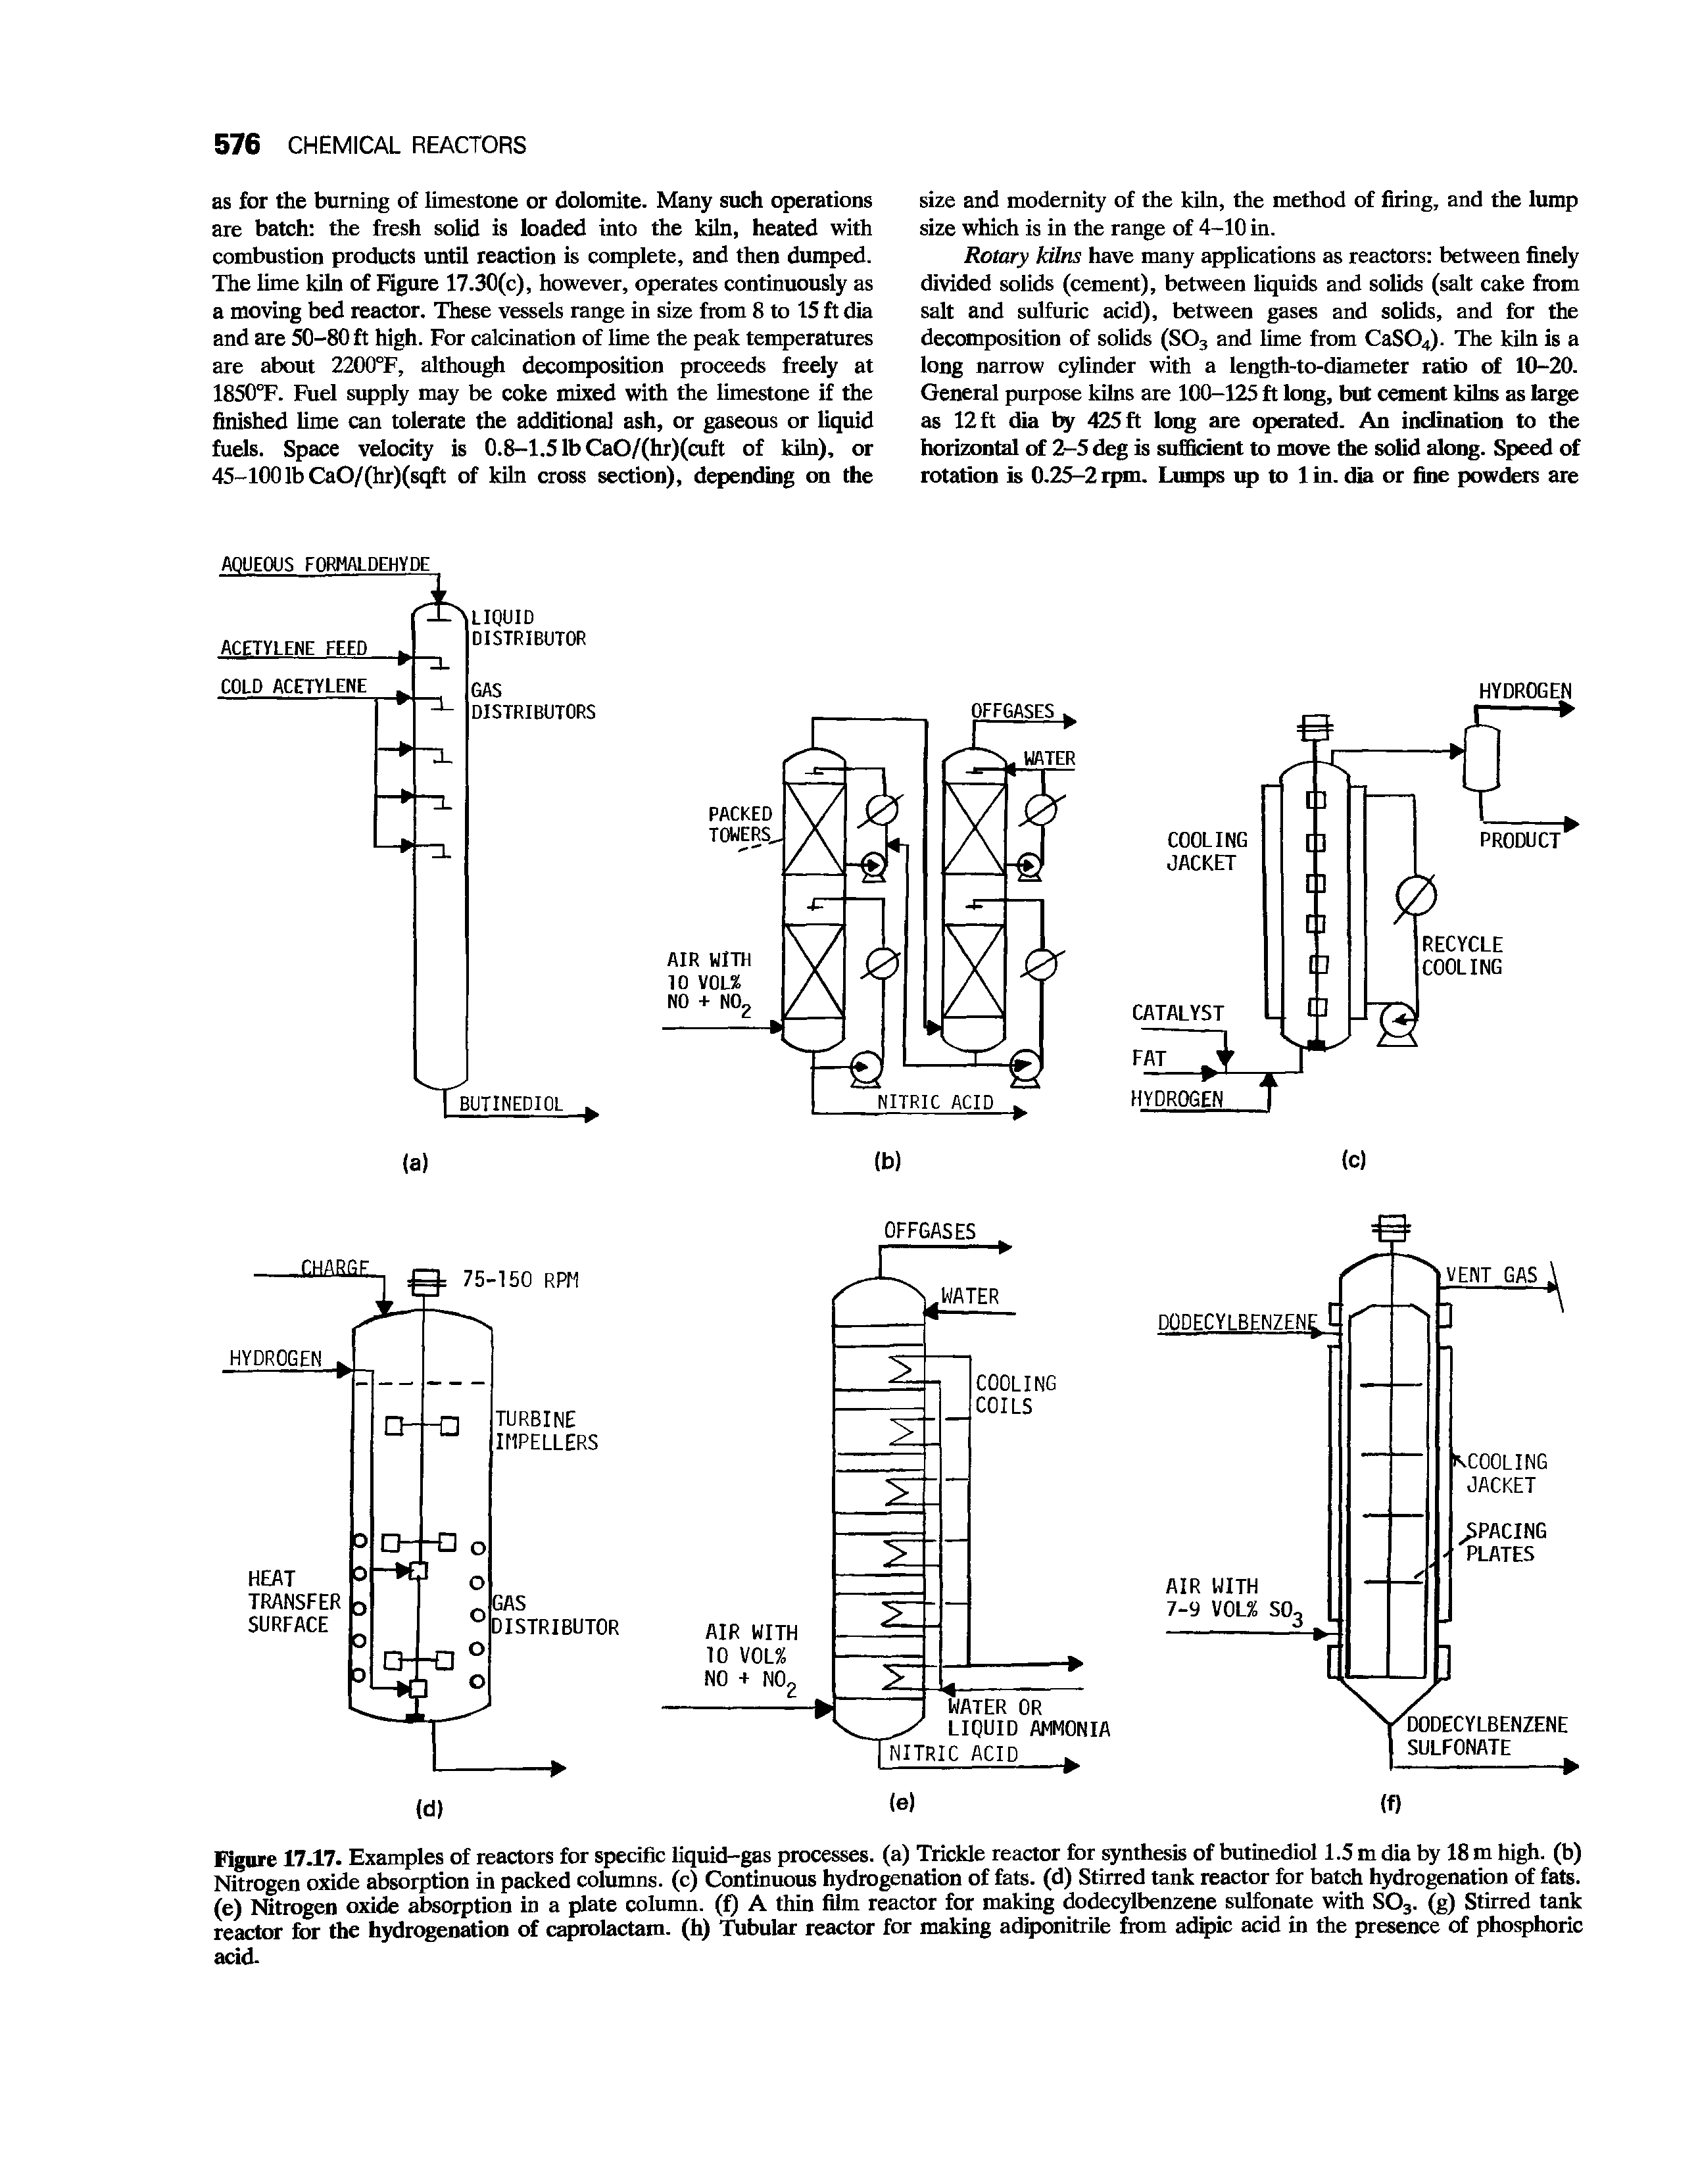 Figure 17.17. Examples of reactors for specific liquid-gas processes, (a) Trickle reactor for synthesis of butinediol 1.5 m dia by 18 m high, (b) Nitrogen oxide absorption in packed columns, (c) Continuous hydrogenation of fats, (d) Stirred tank reactor for batch hydrogenation of fats, (e) Nitrogen oxide absorption in a plate column, (f) A thin film reactor for making dodecylbenzene sulfonate with S03. (g) Stirred tank reactor for the hydrogenation of caprolactam, (h) Tubular reactor for making adiponitrile from adipic acid in the presence of phosphoric acid.